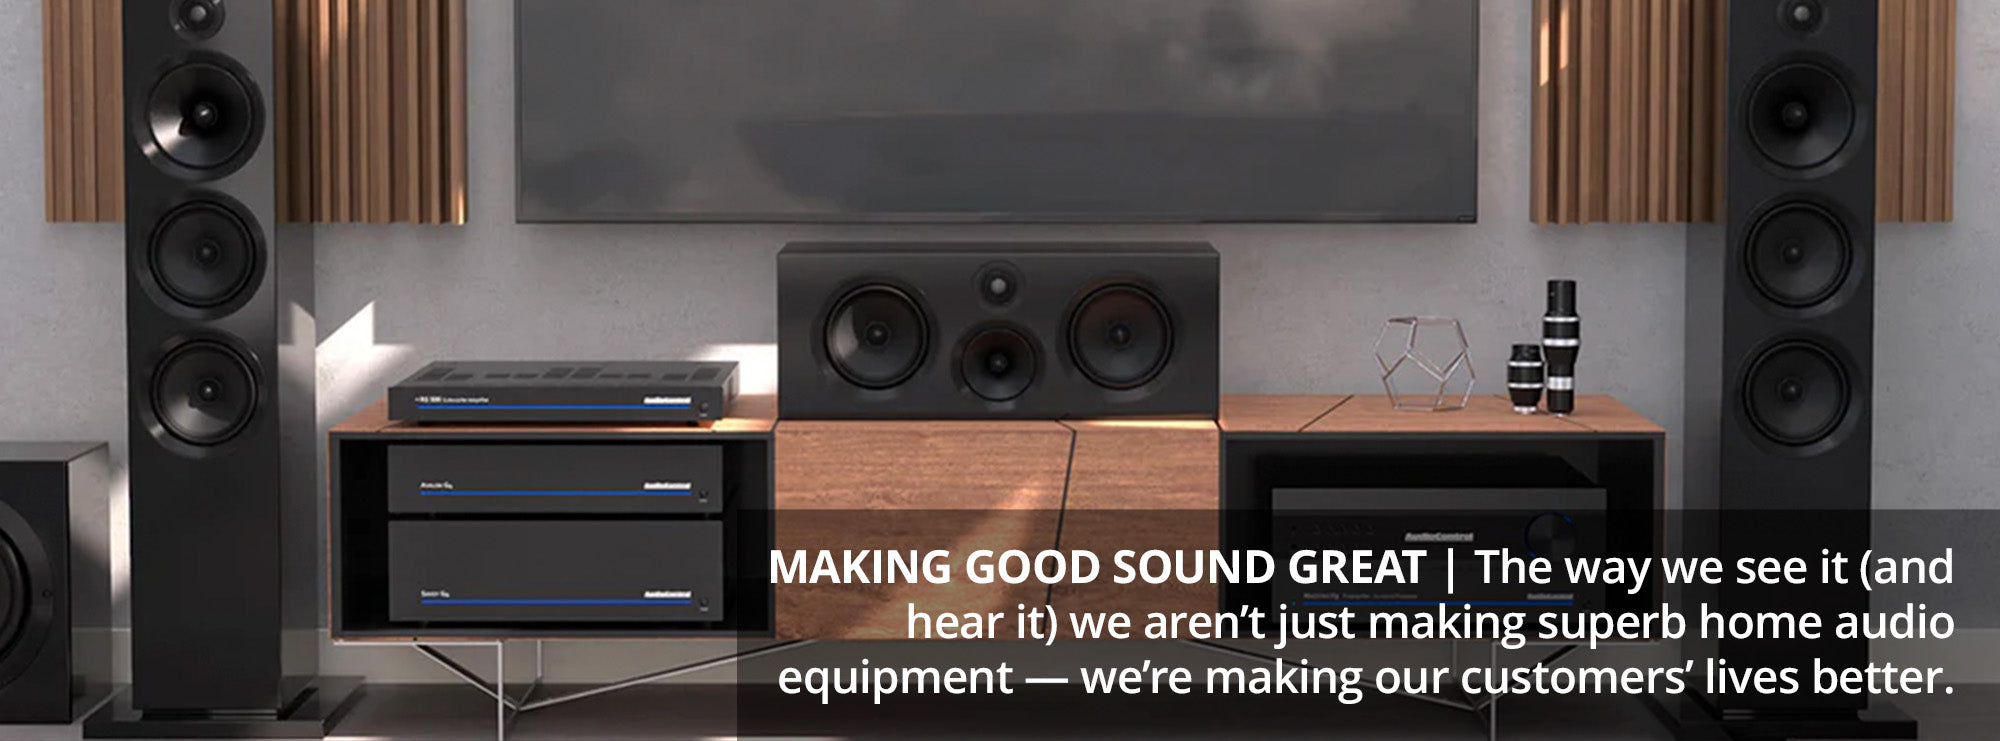 Making Good Sound Great The way we see it (and hear it) we aren’t just making superb home audio equipment — we’re making our customers’ lives better.